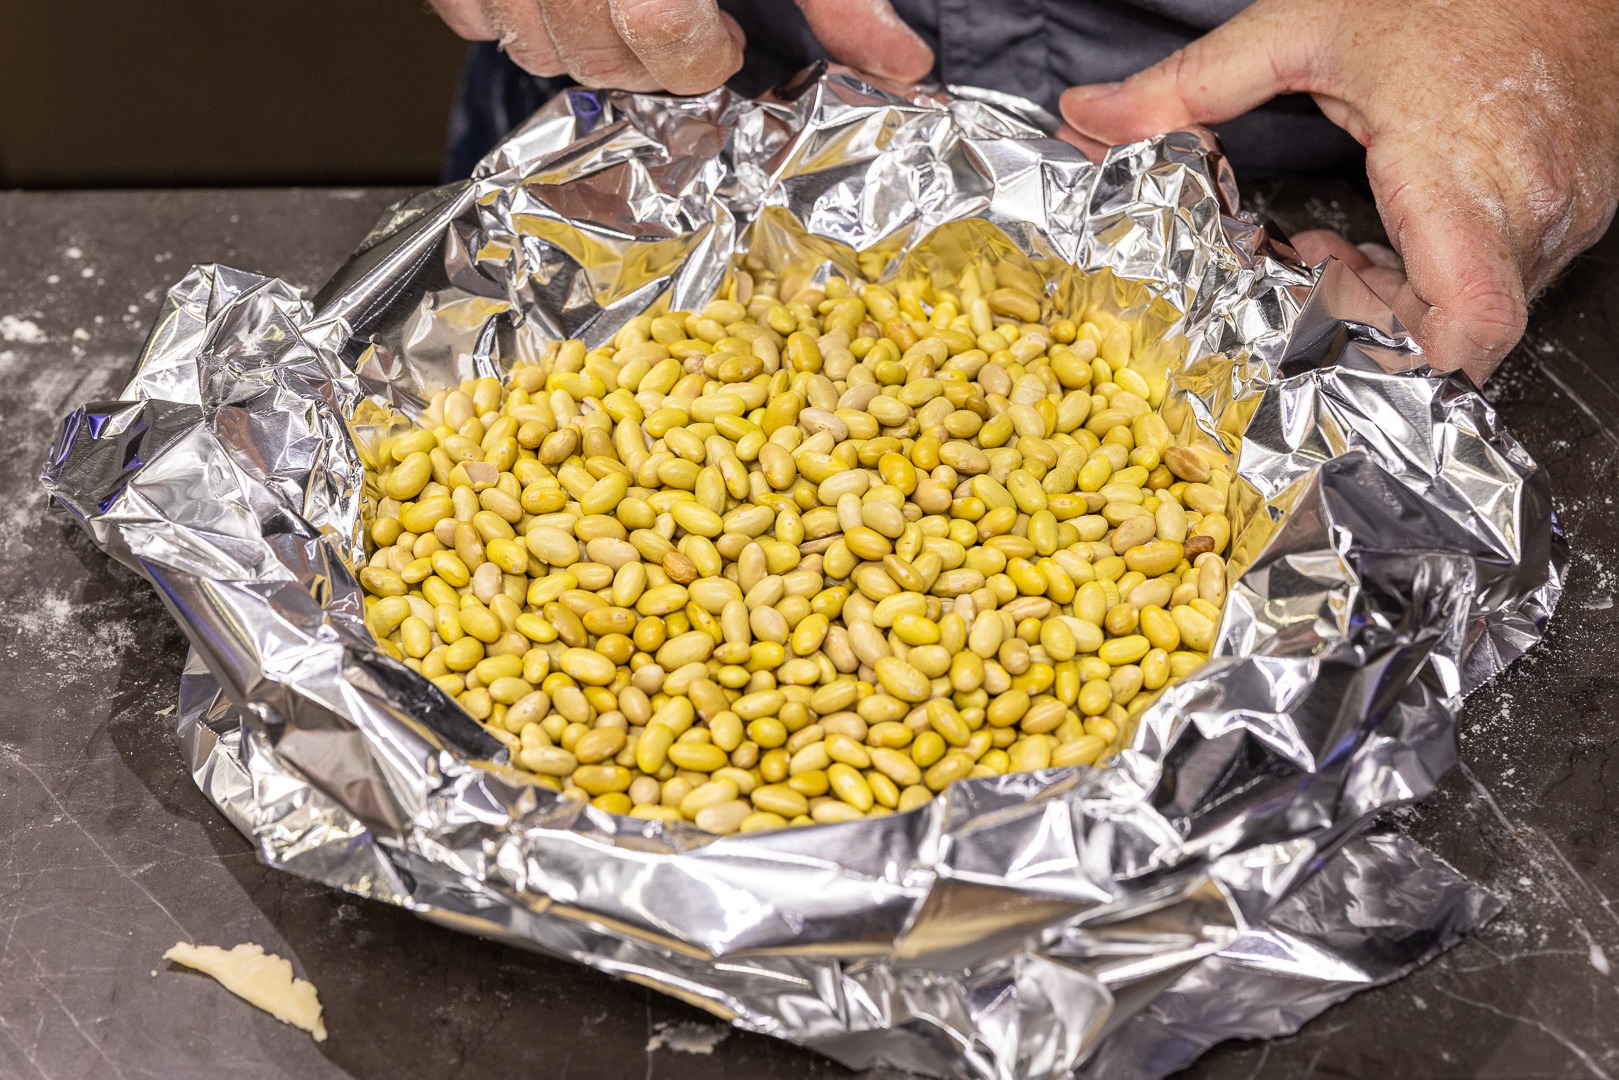 adding weights (beans) to the foil)